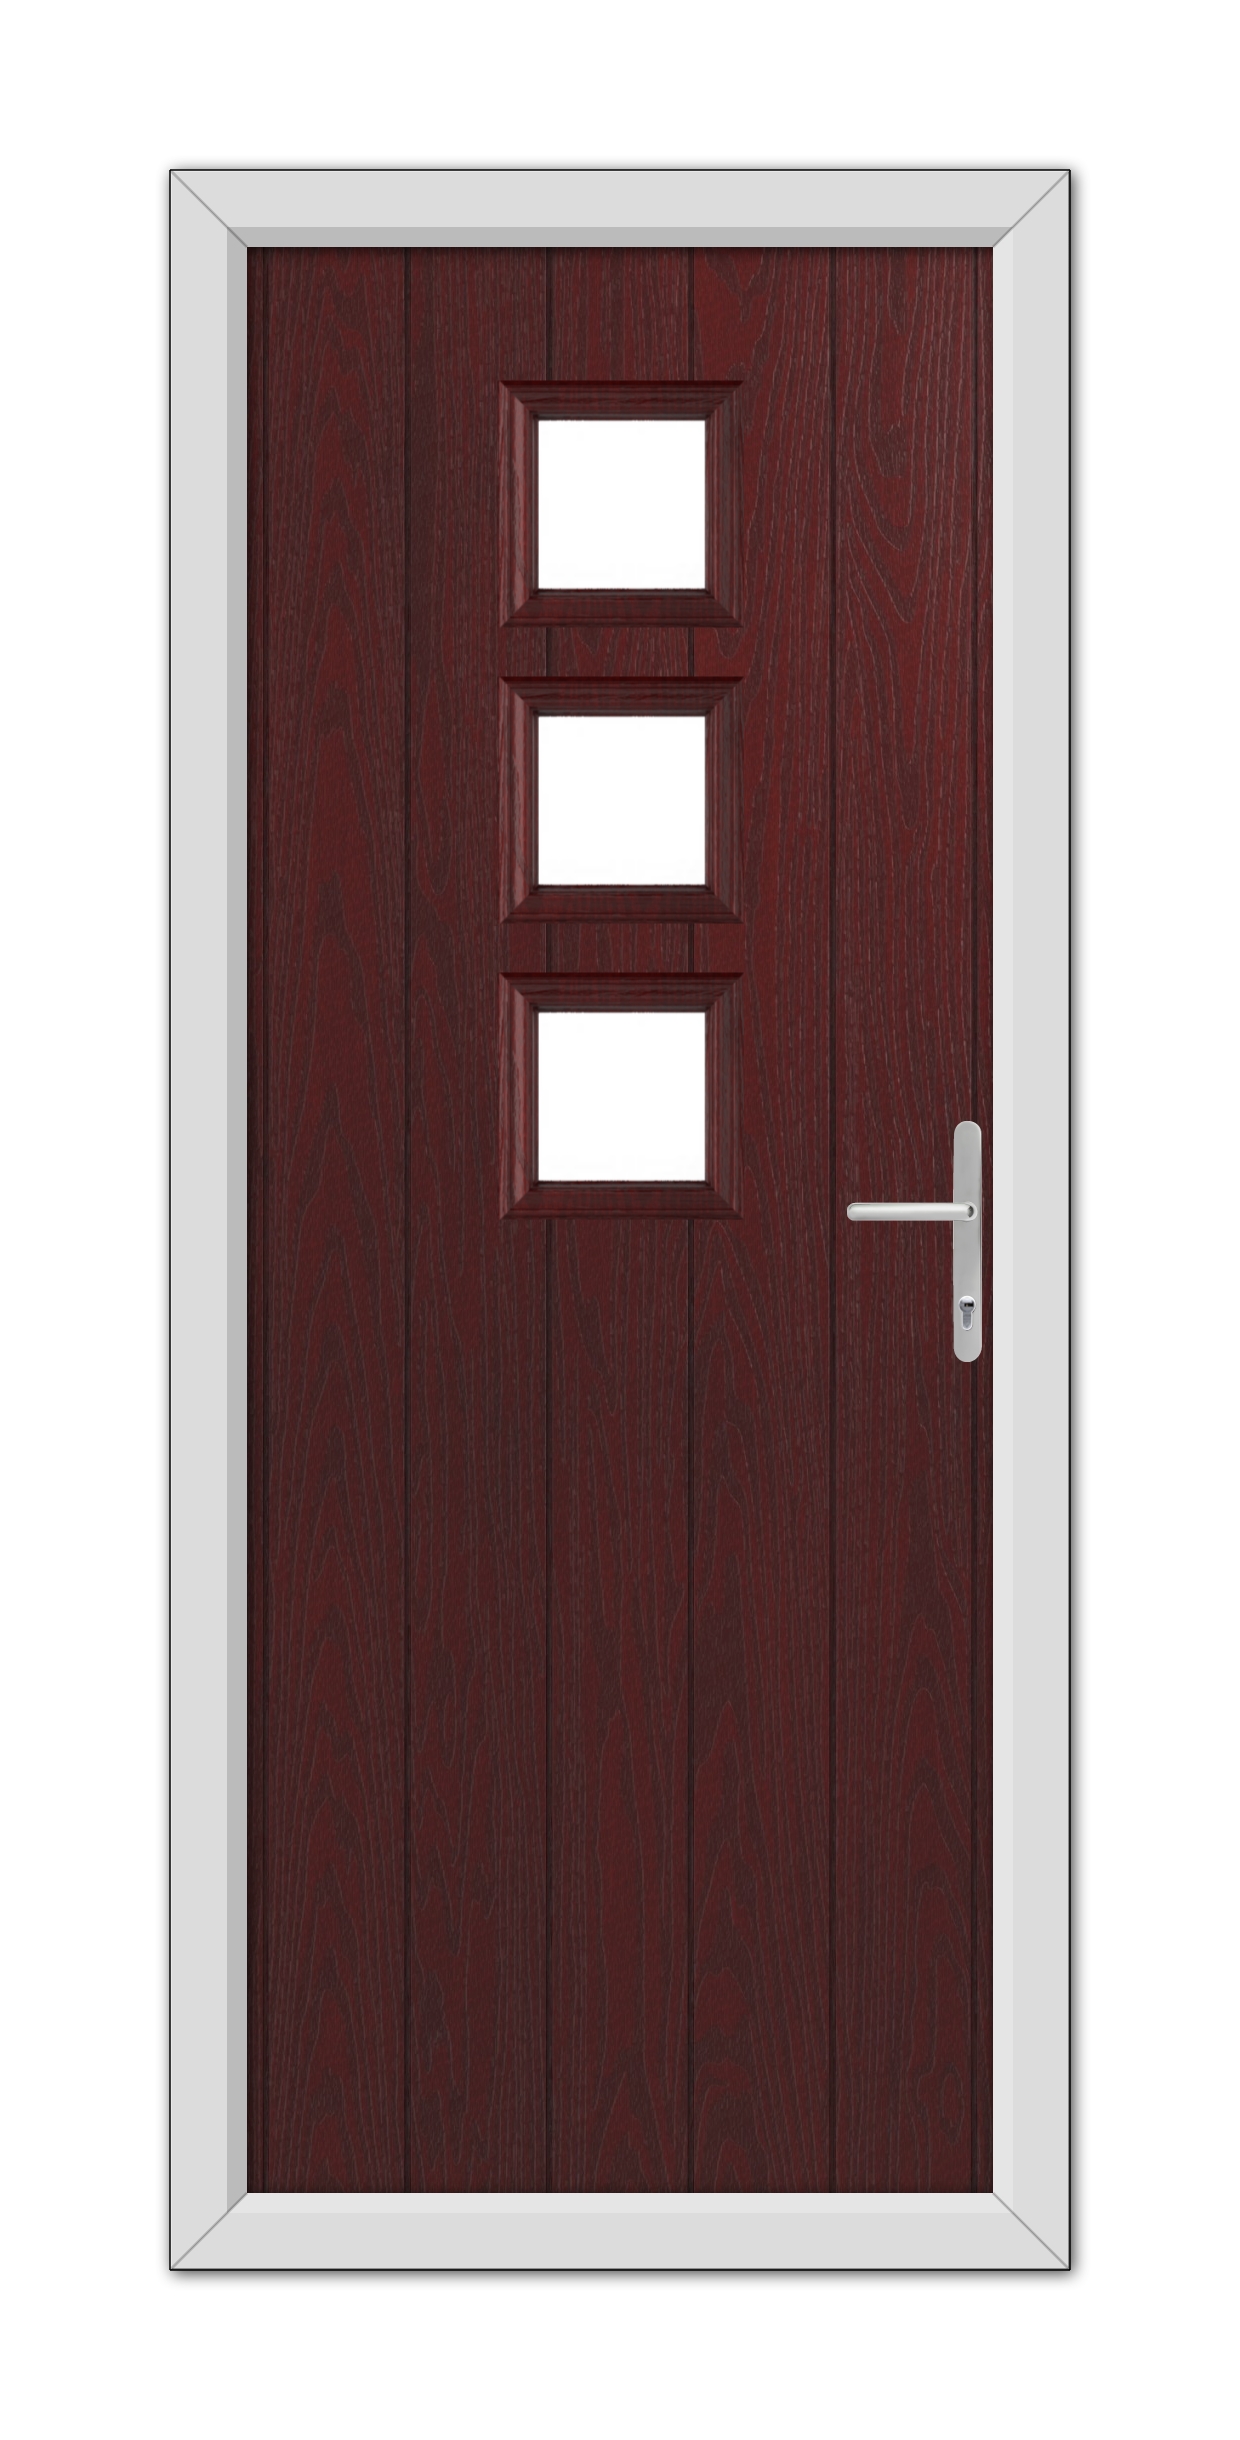 A Rosewood Montrose Composite Door 48mm Timber Core with three horizontal glass panels and a metallic handle, set within a grey frame.